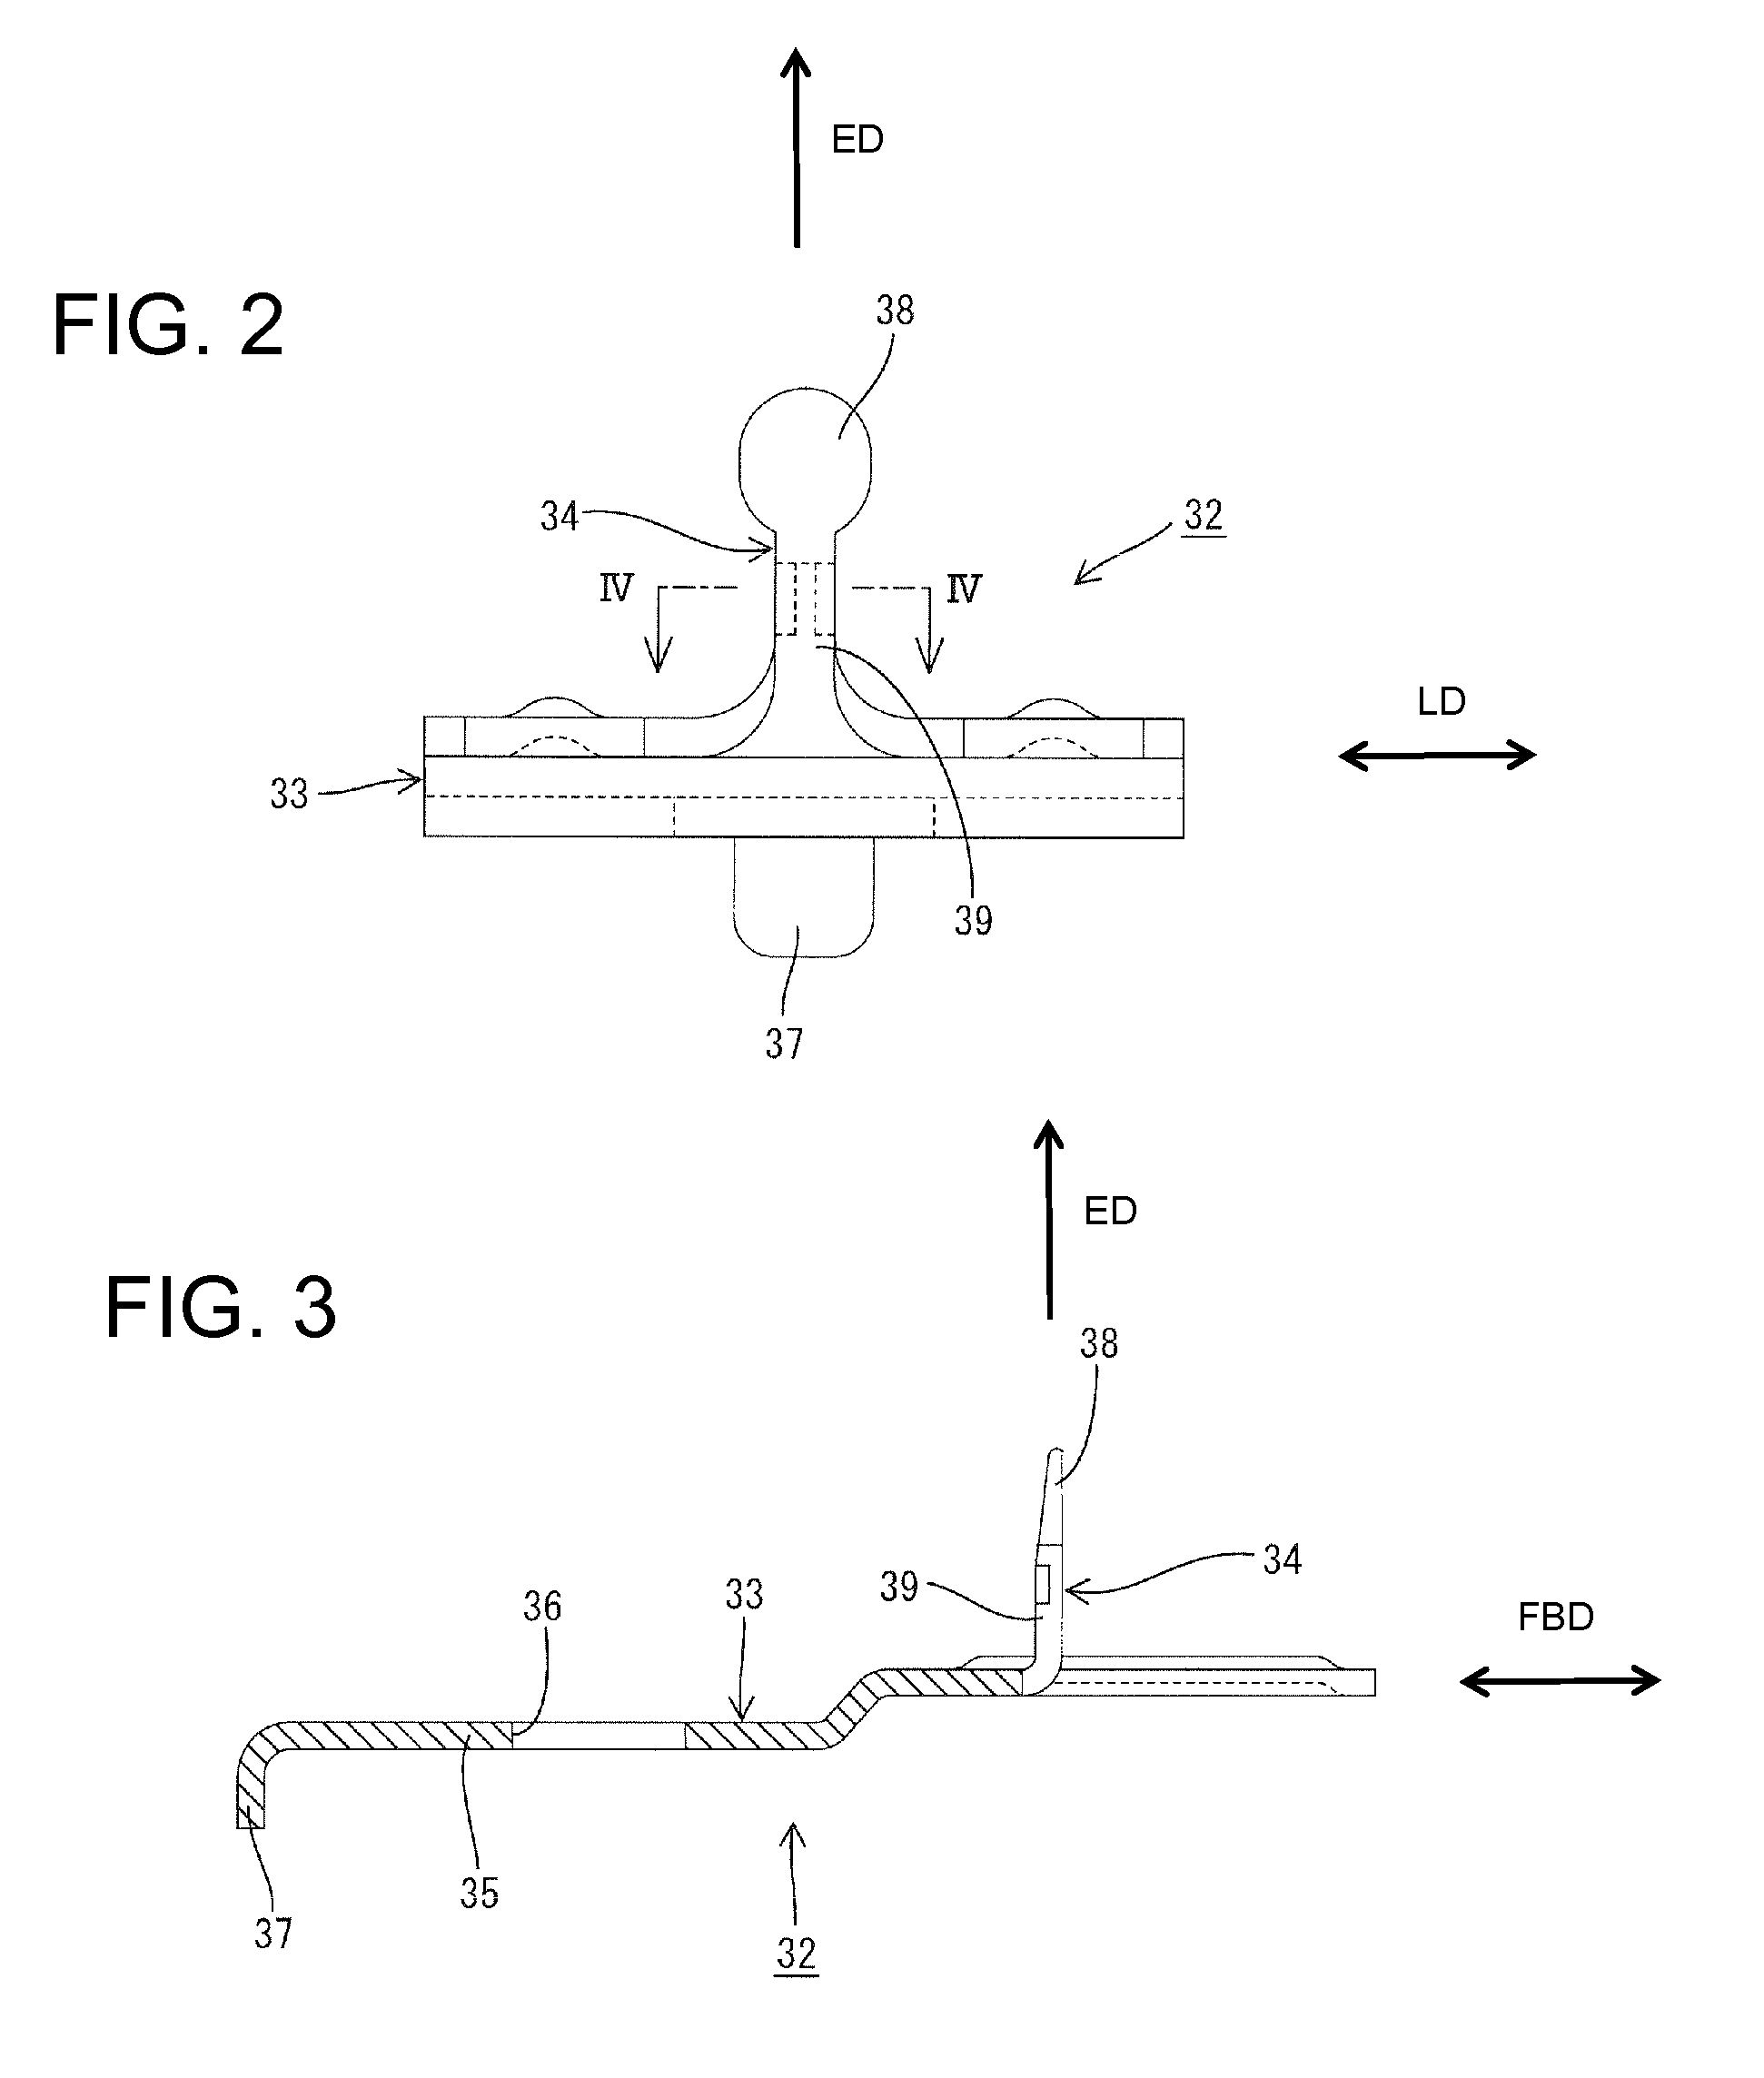 Electrical connector having an electronic device